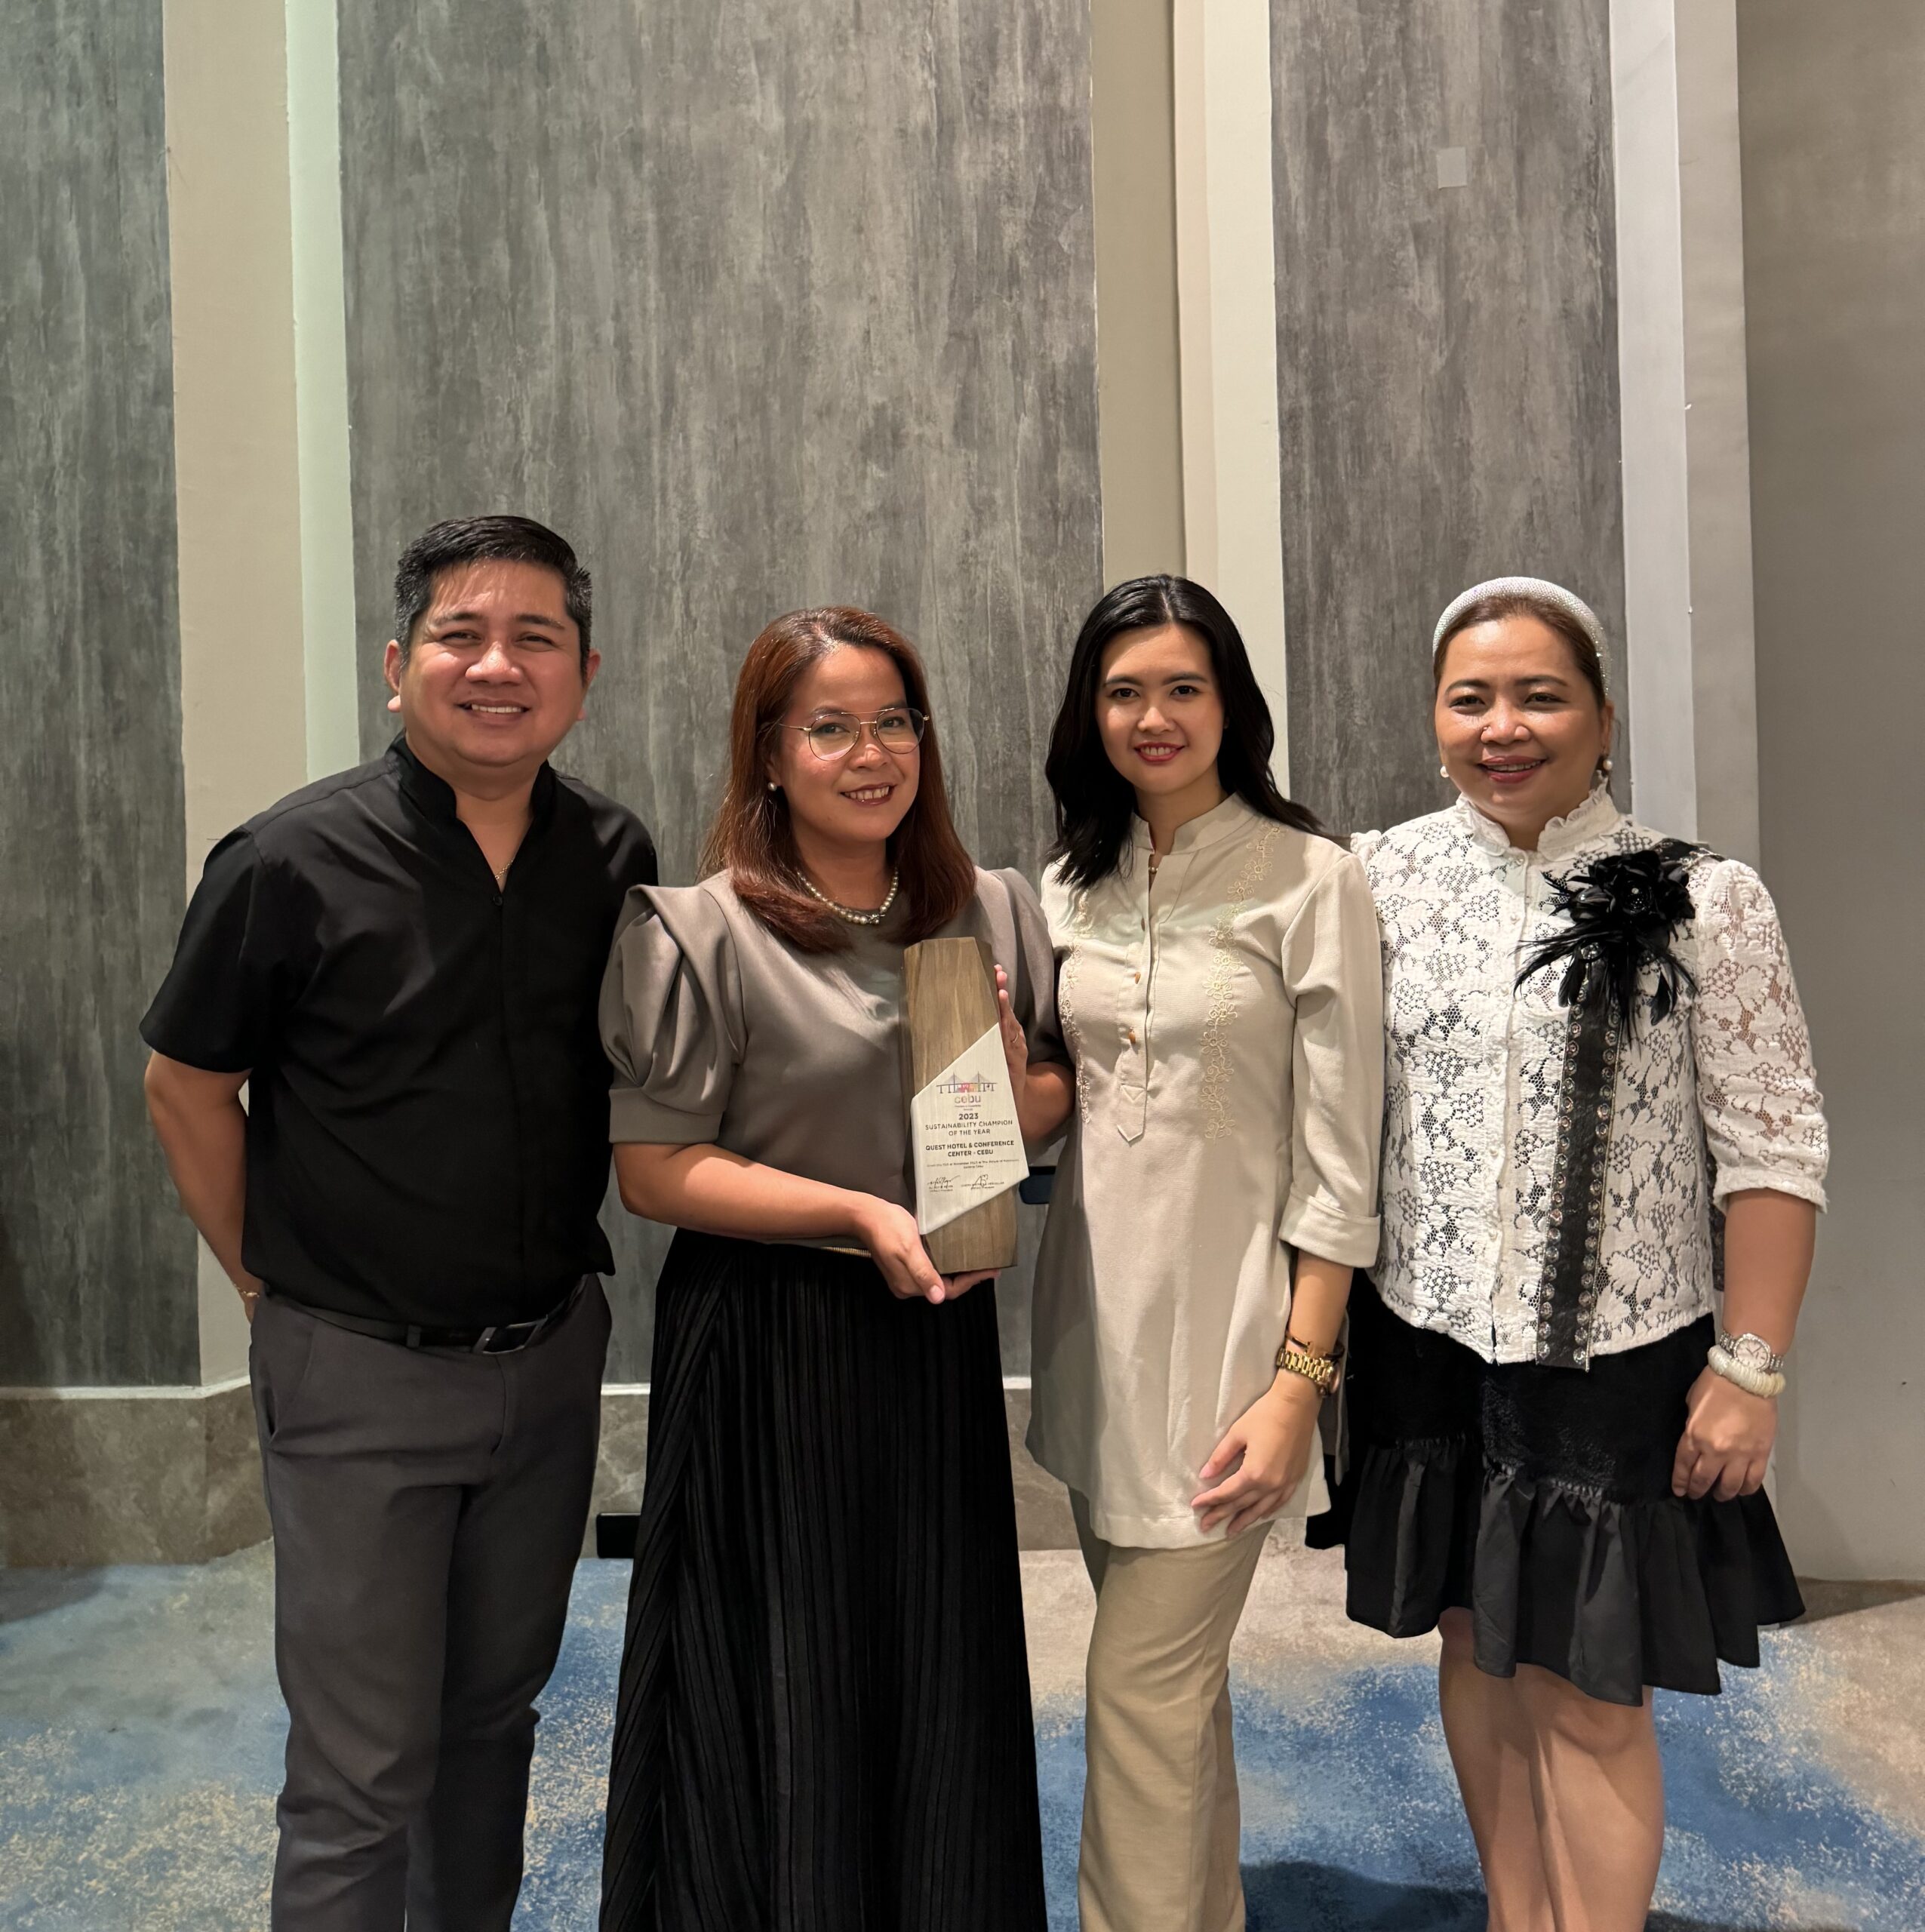 Double Accolades for Quest Hotel at the Virtus Awards and Cebu Tourism and Hospitality Awards 